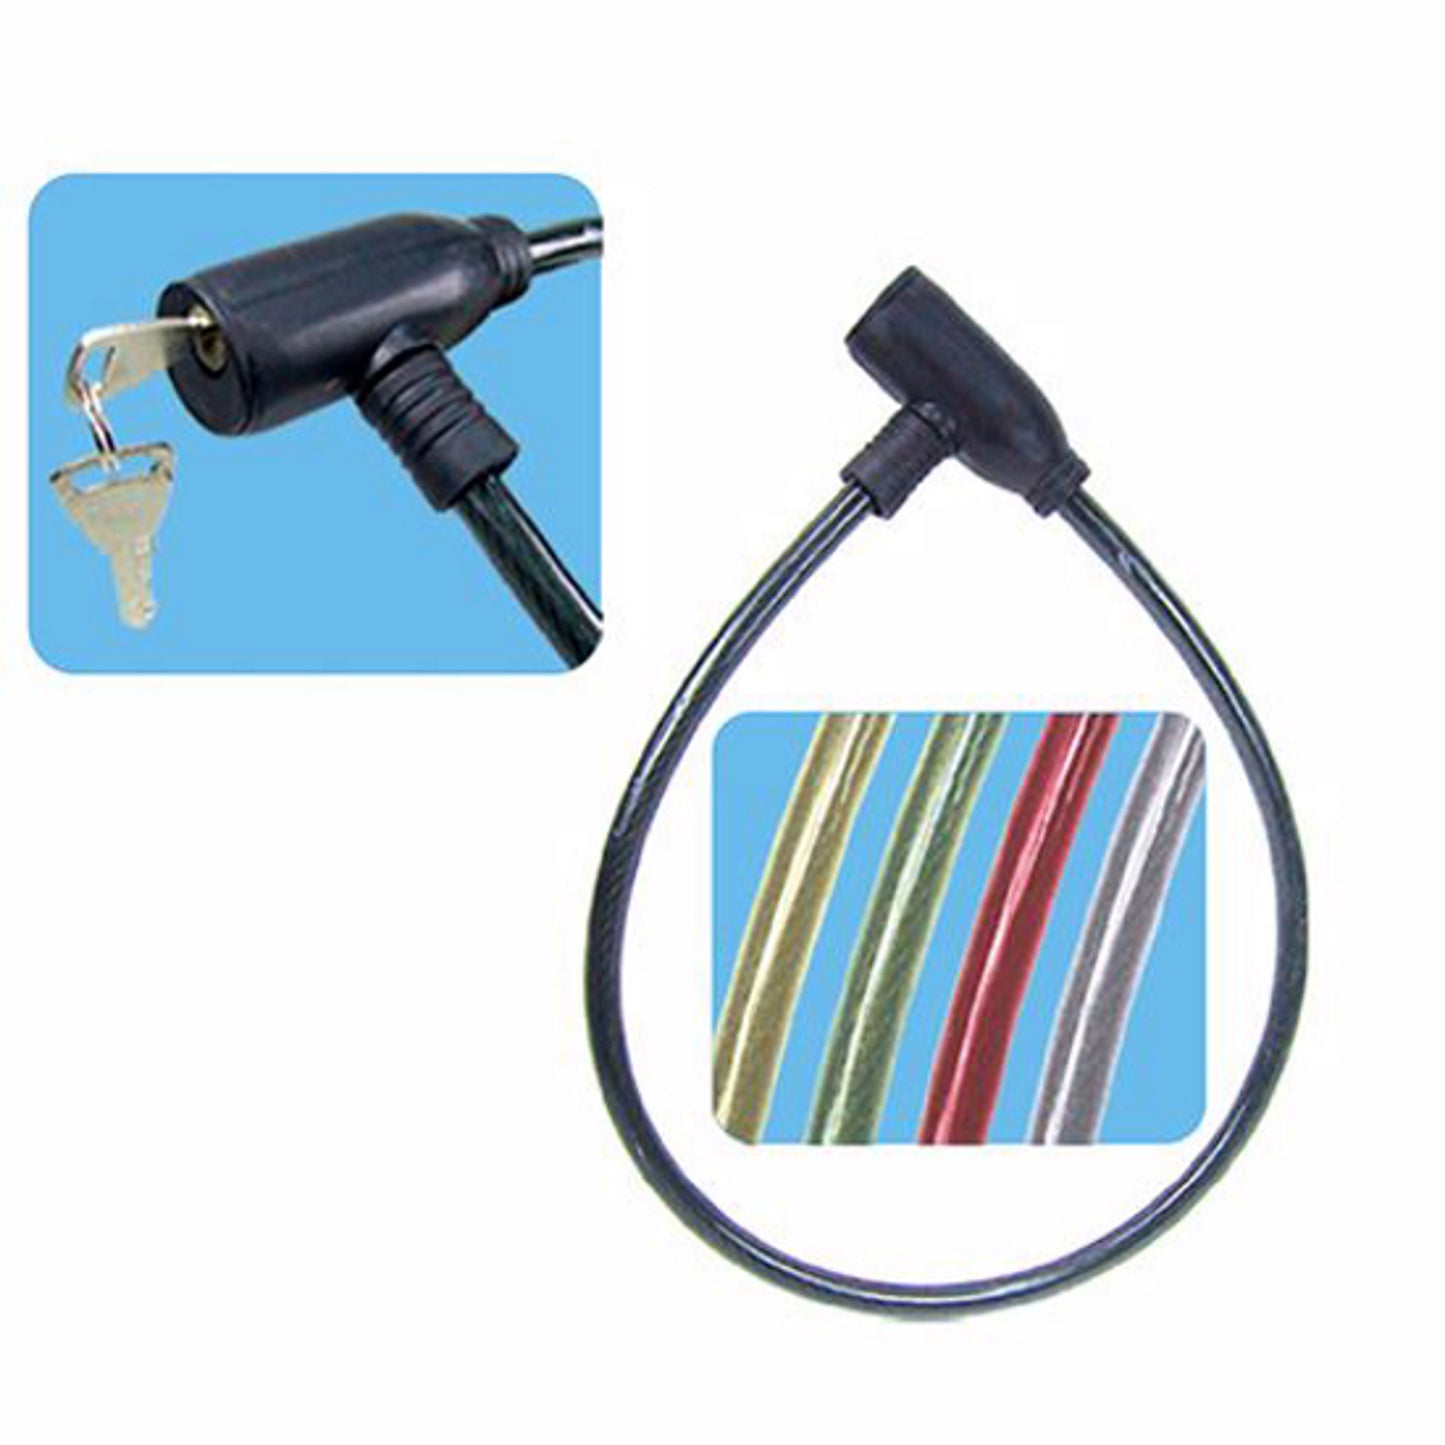 Cable Bicycle Lock Keyed Type with 2 Keys, 2 Ft Long Security Cable Lock Heavy Duty Anti-Theft - Random Color